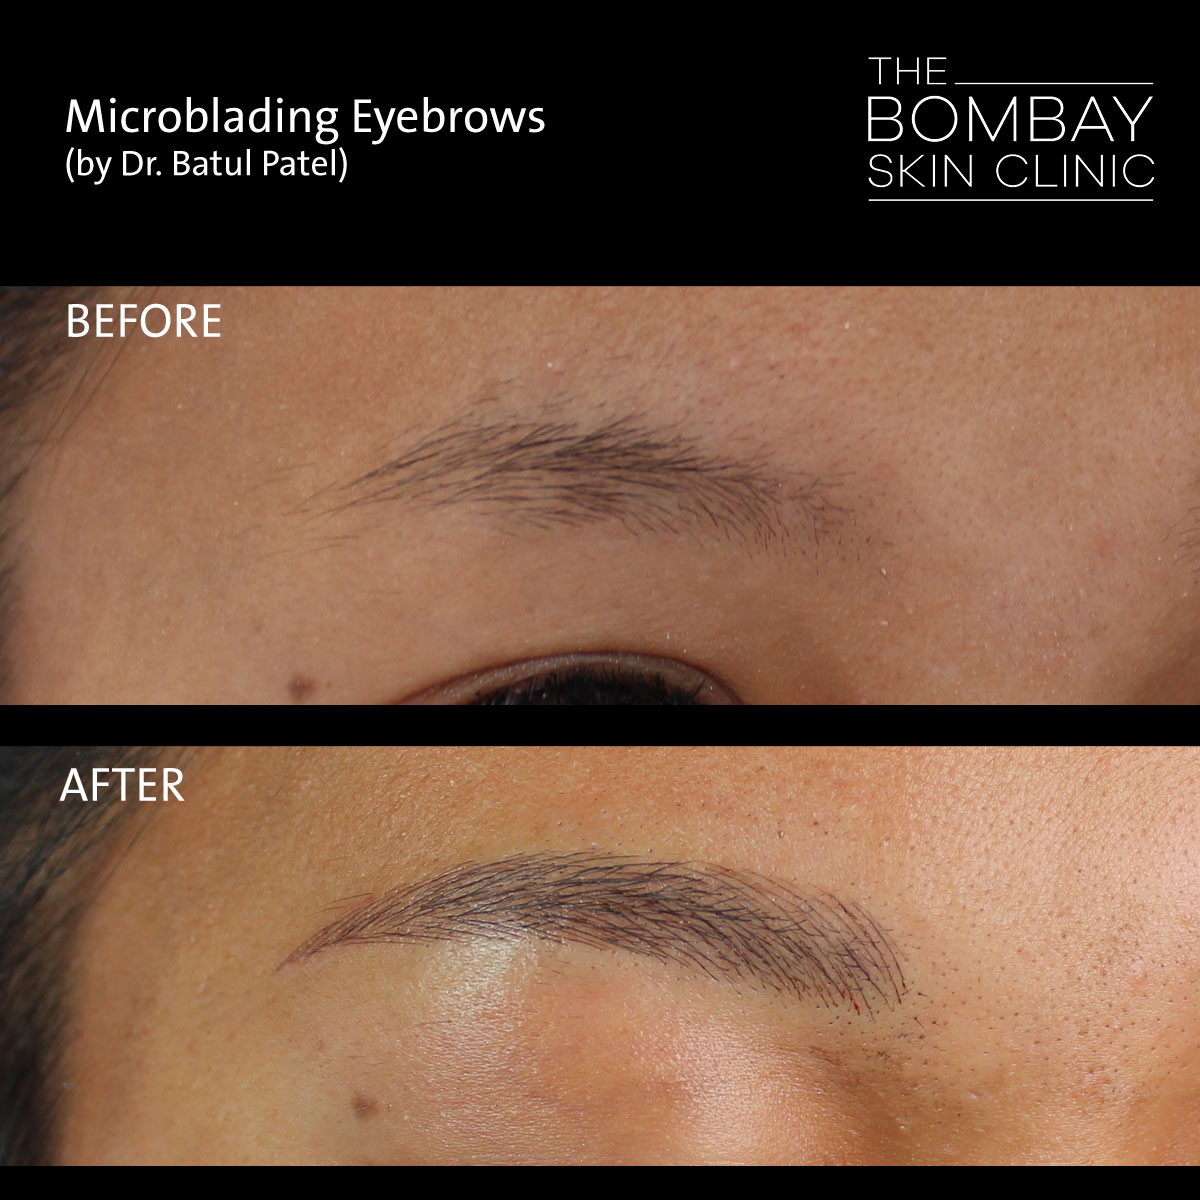 Microblading Eyebrows Before After